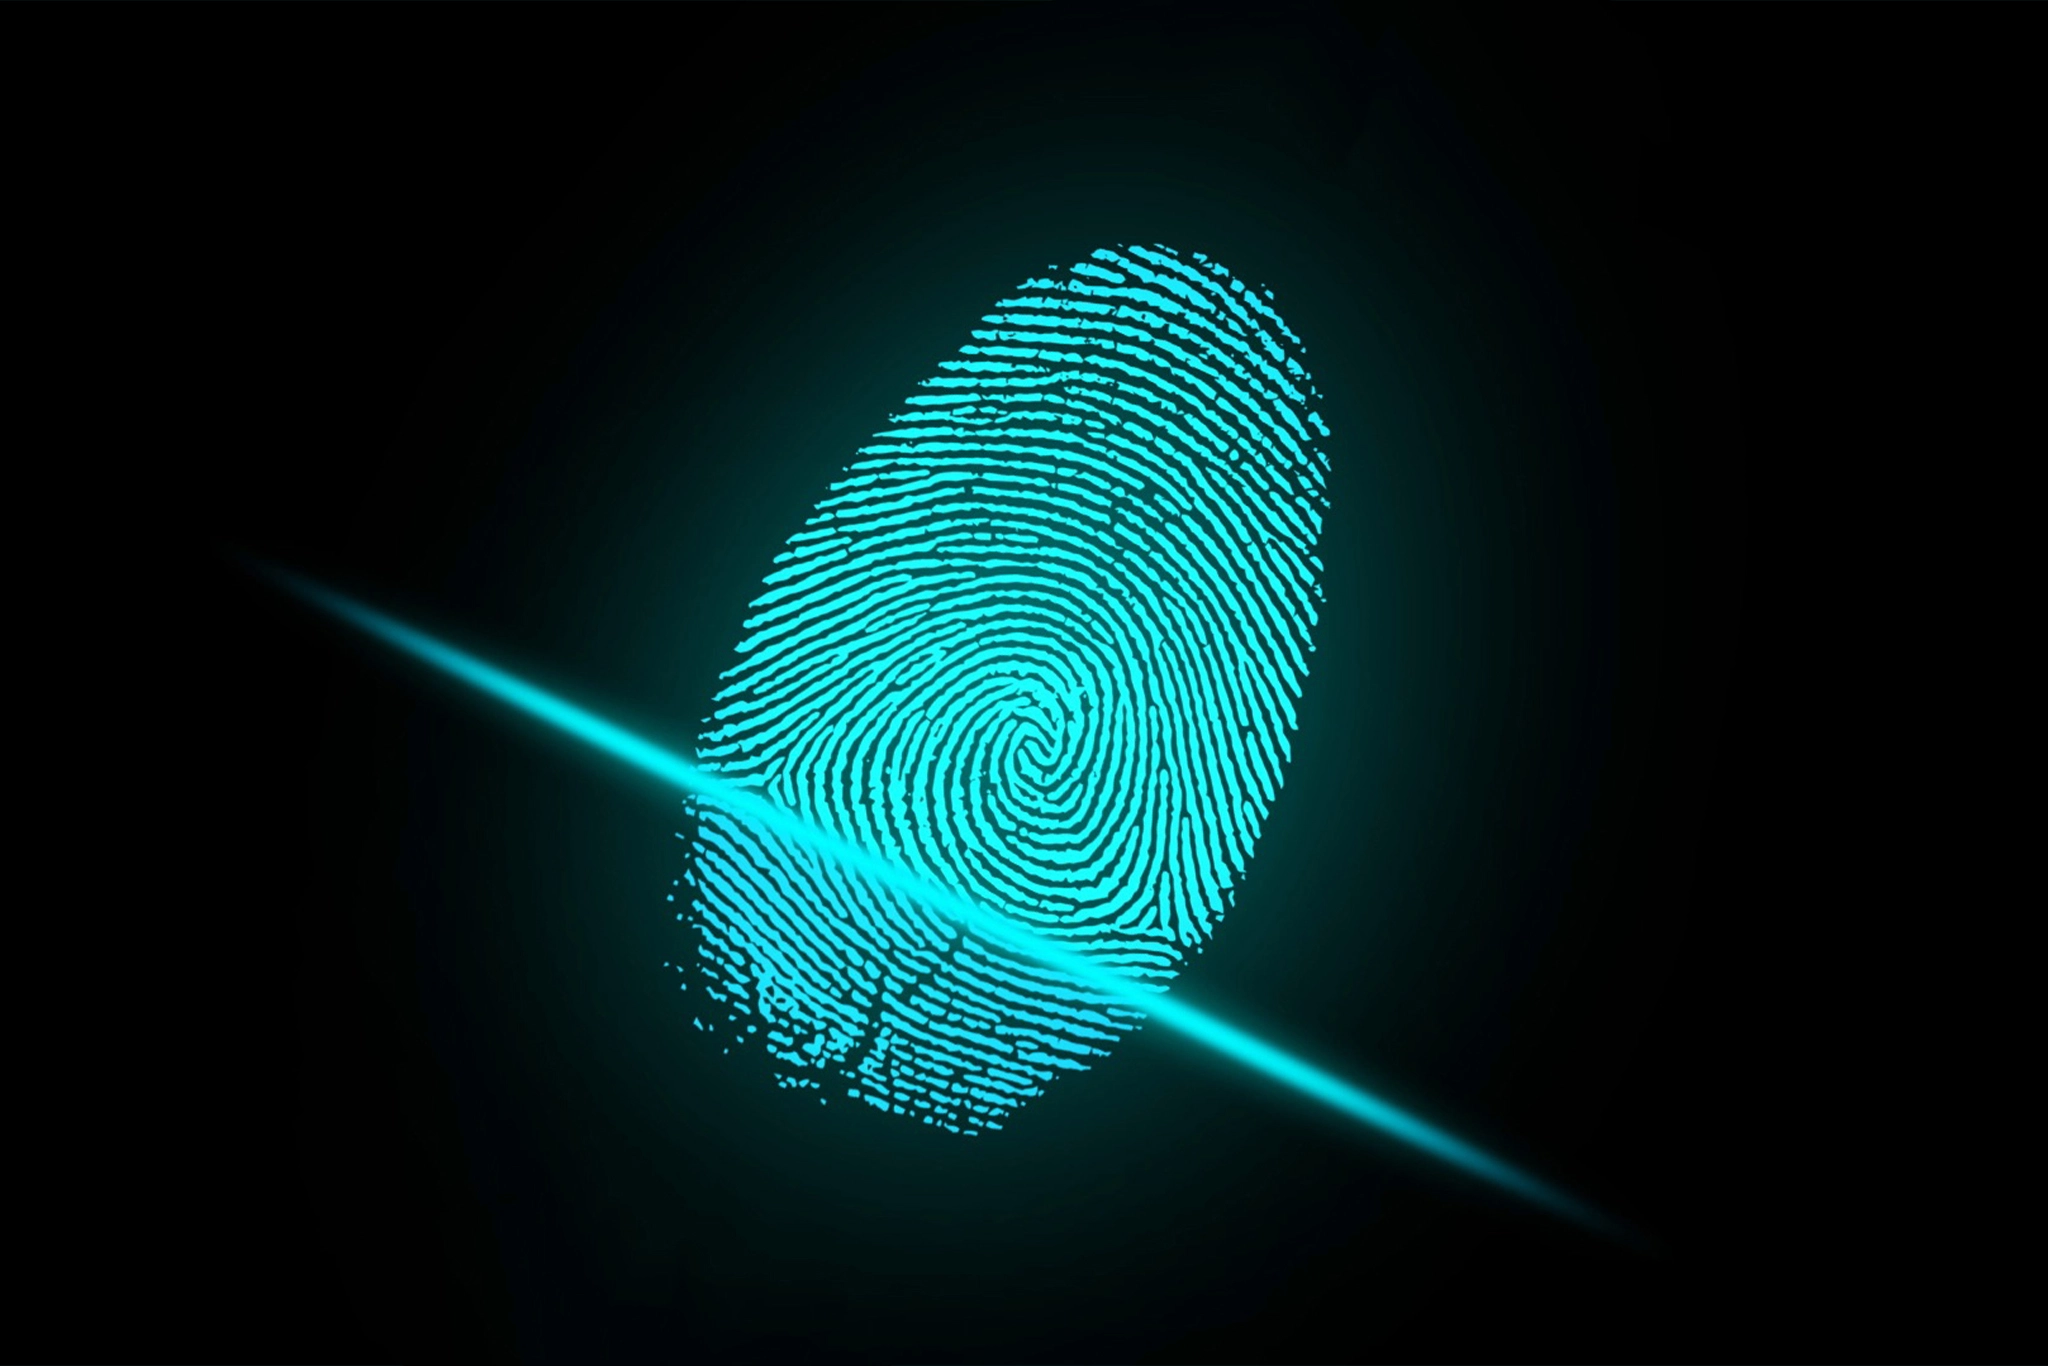 Introducing Biometric Authentication